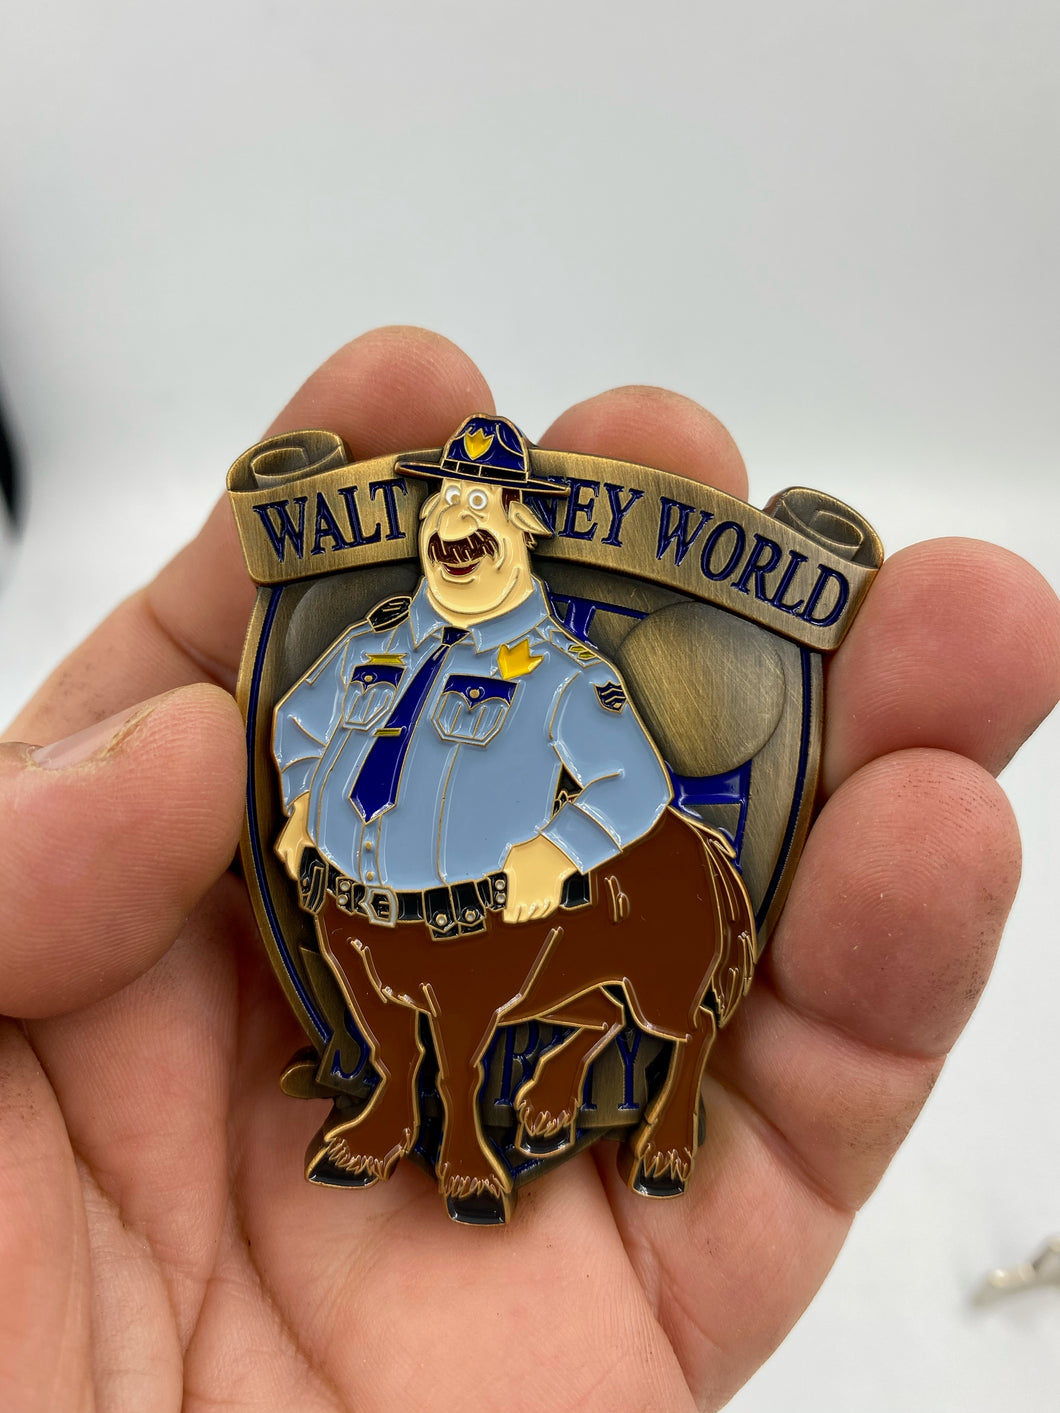 Disney Pixars Onward Inspired Security Challenge Coin Thin Blue Line Police Dispatcher Corrections  MR-012 - www.ChallengeCoinCreations.com